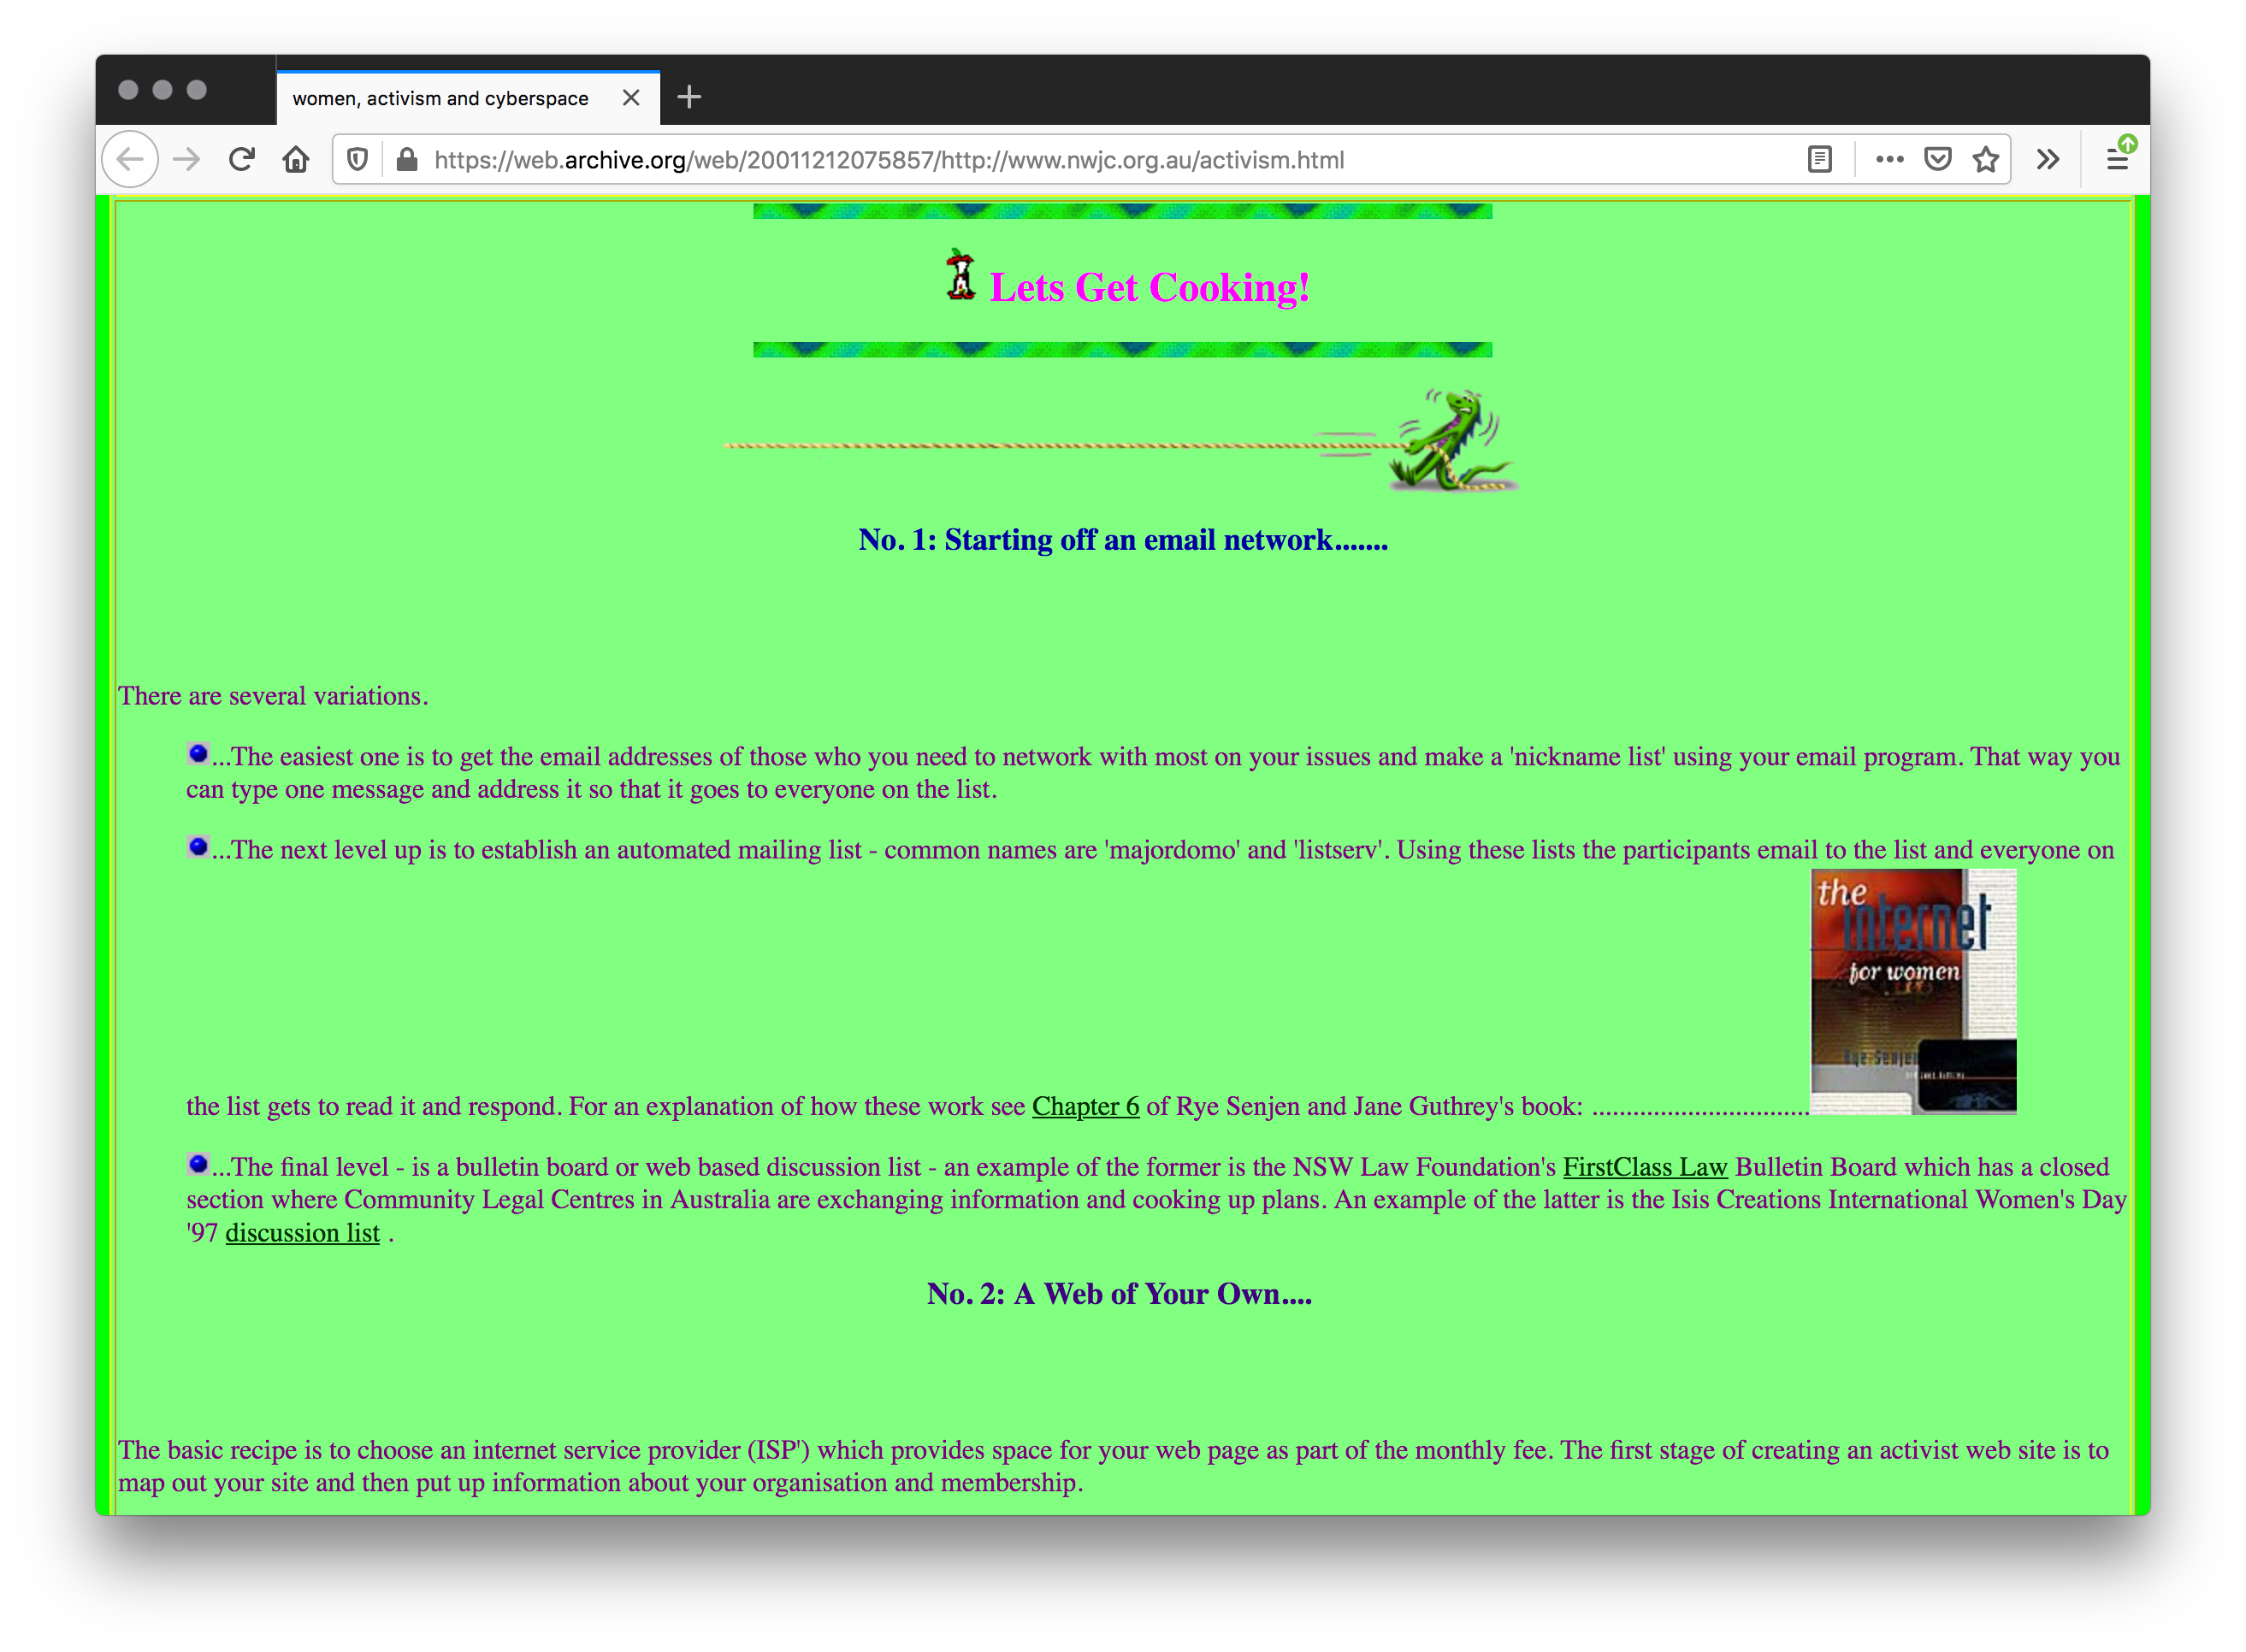 A green webpage with an eaten apple icon and "Lets Get Cooking!" in pink text as the header. The center is made of navy blue titles and bulleted violet text. A book titled "The internet for women" and an eye and a phone on the cover is on the right.